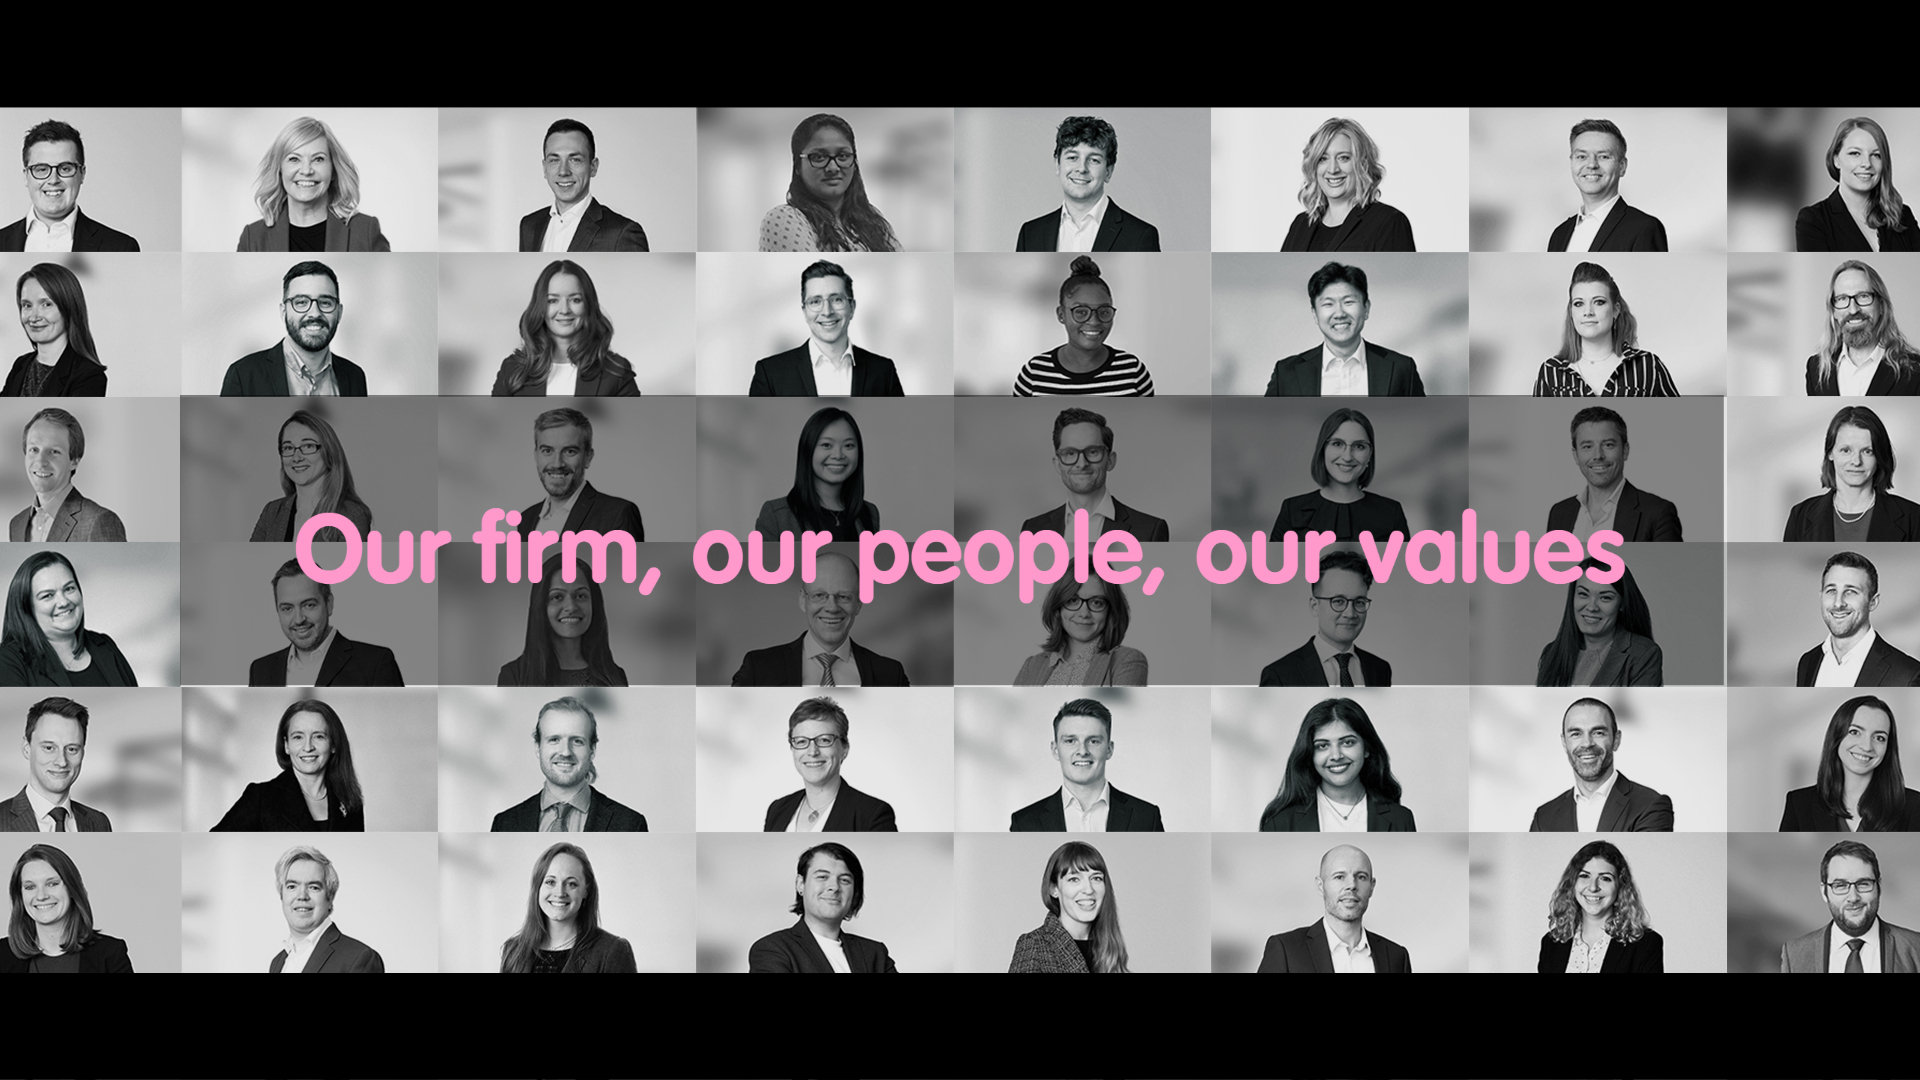 Our firm, our values, our people (2)